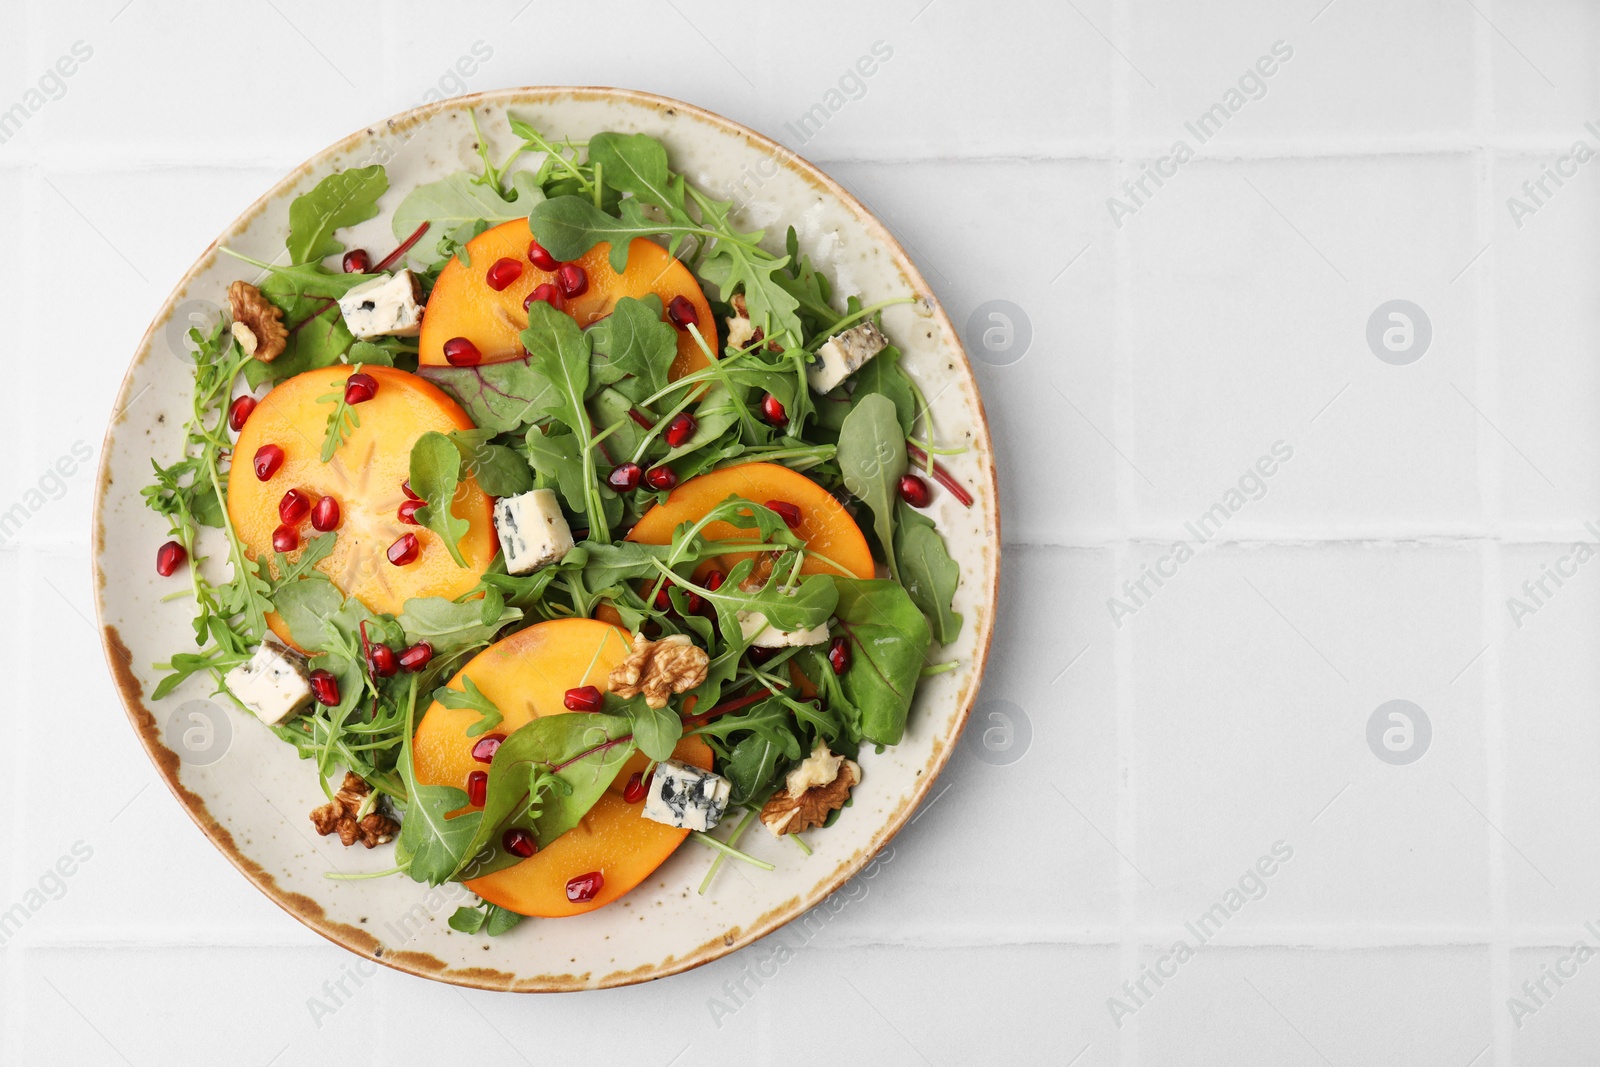 Photo of Tasty salad with persimmon, blue cheese, pomegranate and walnuts served on white tiled table, top view. Space for text